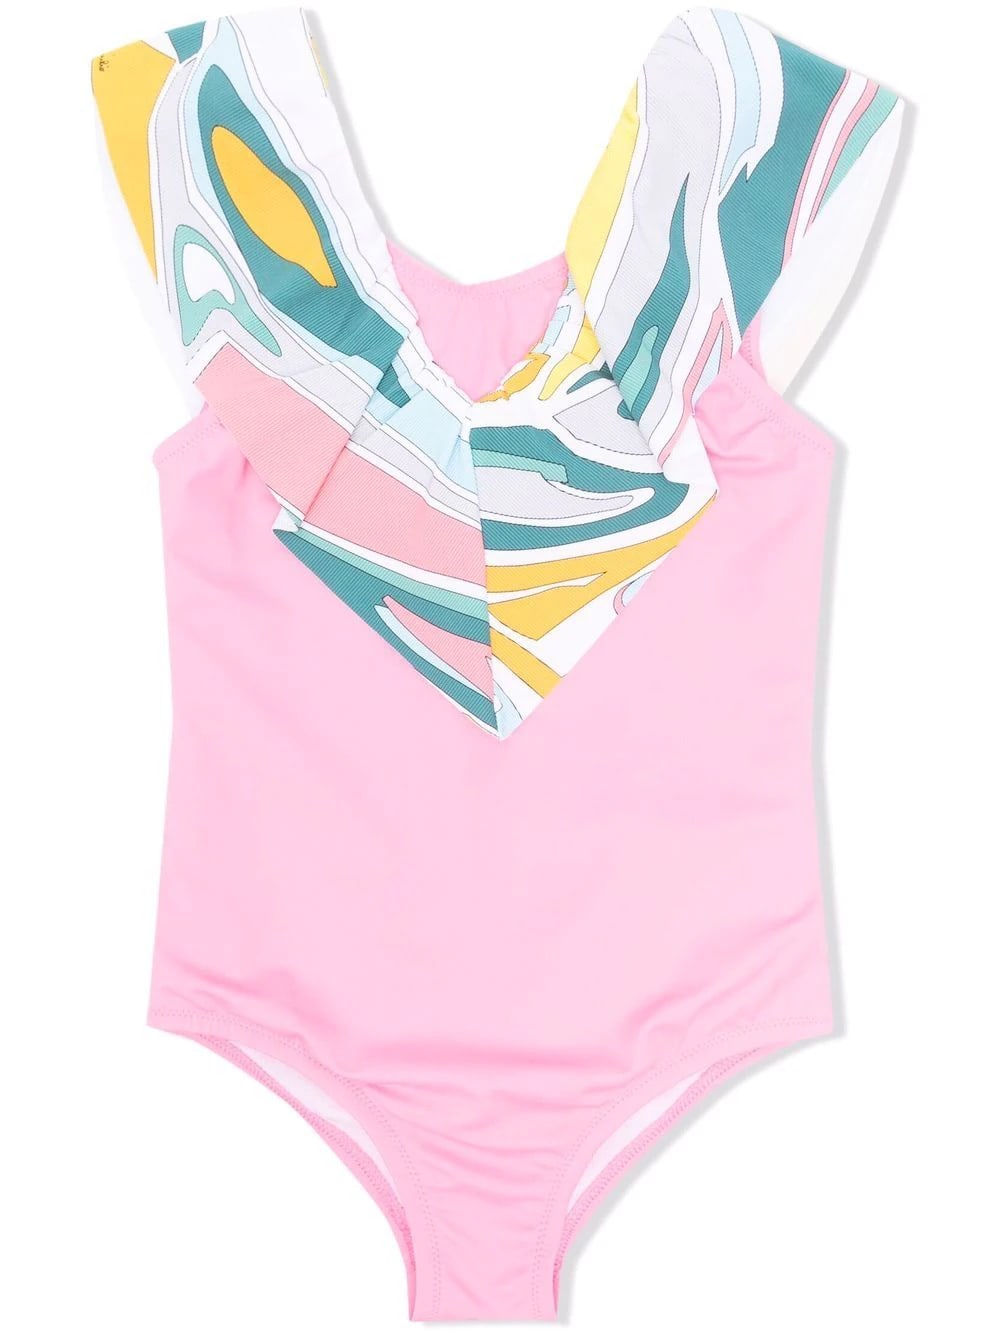 EMILIO PUCCI KIDS PINK ONE-PIECE SWIMSUIT WITH PRINTED INSERT